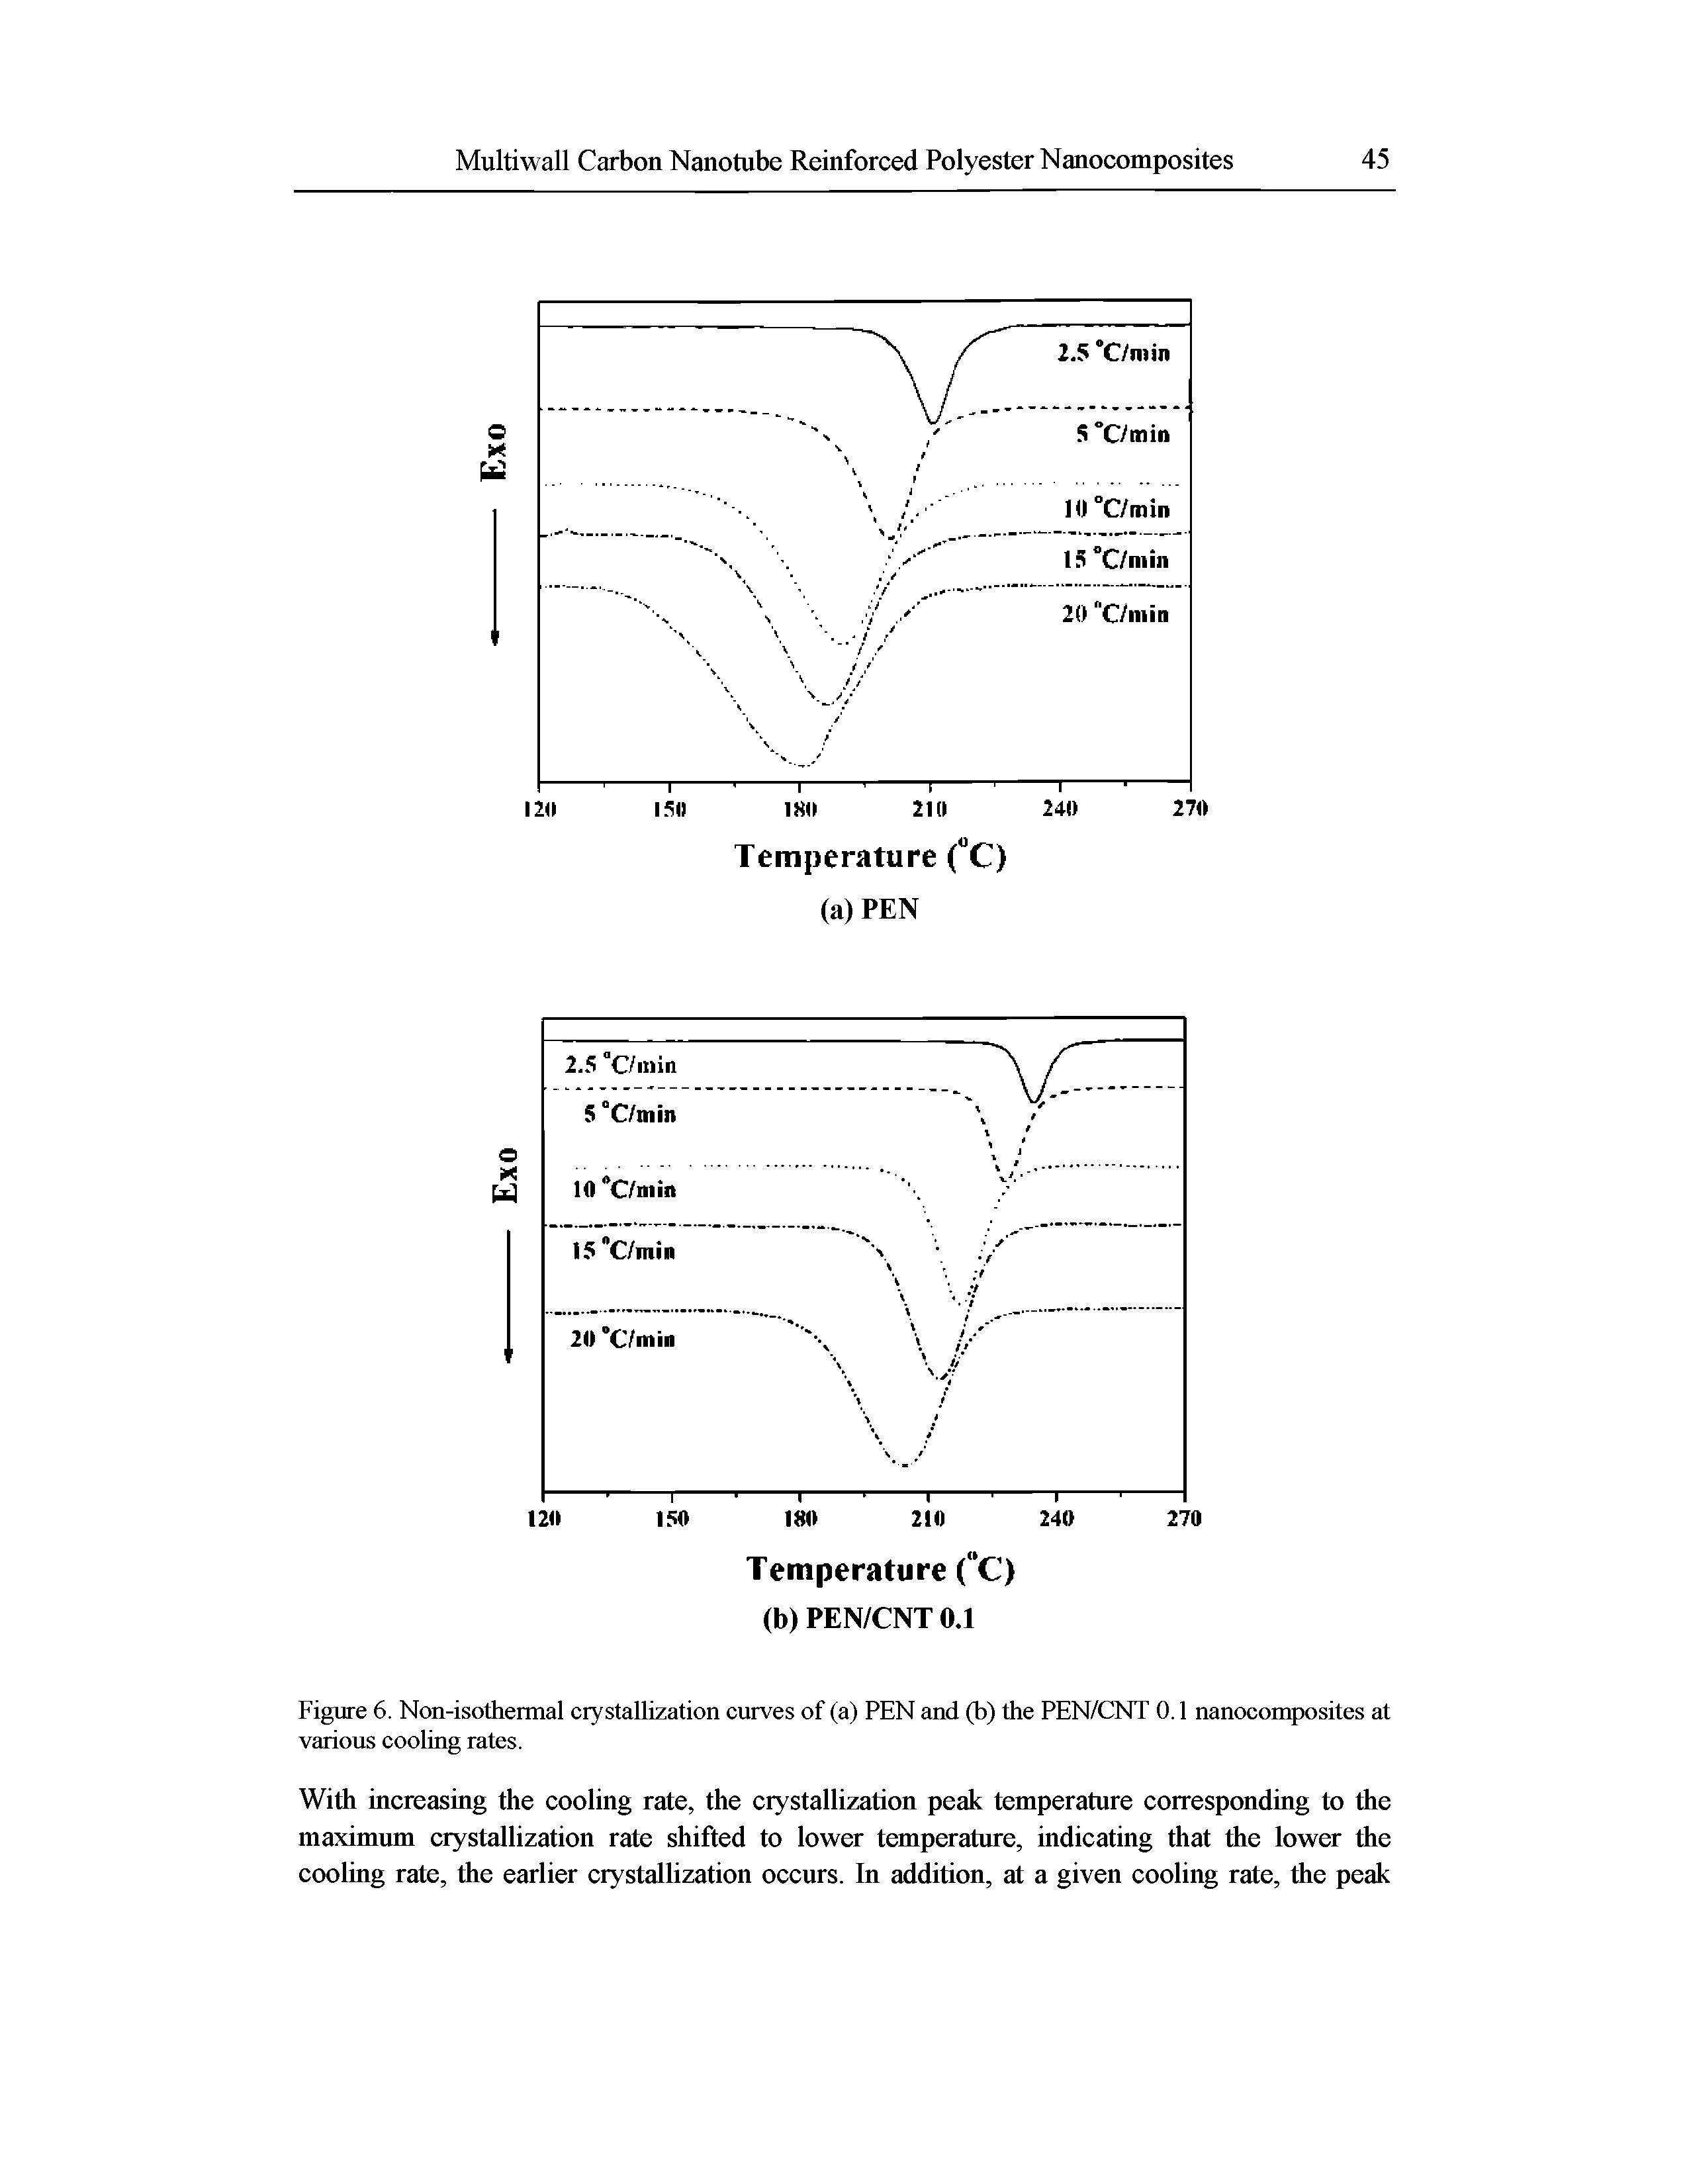 Figure 6. Non-isothermal crystallization curves of (a) PEN and (b) the PEN/CNT 0.1 nanocomposites at various cooling rates.